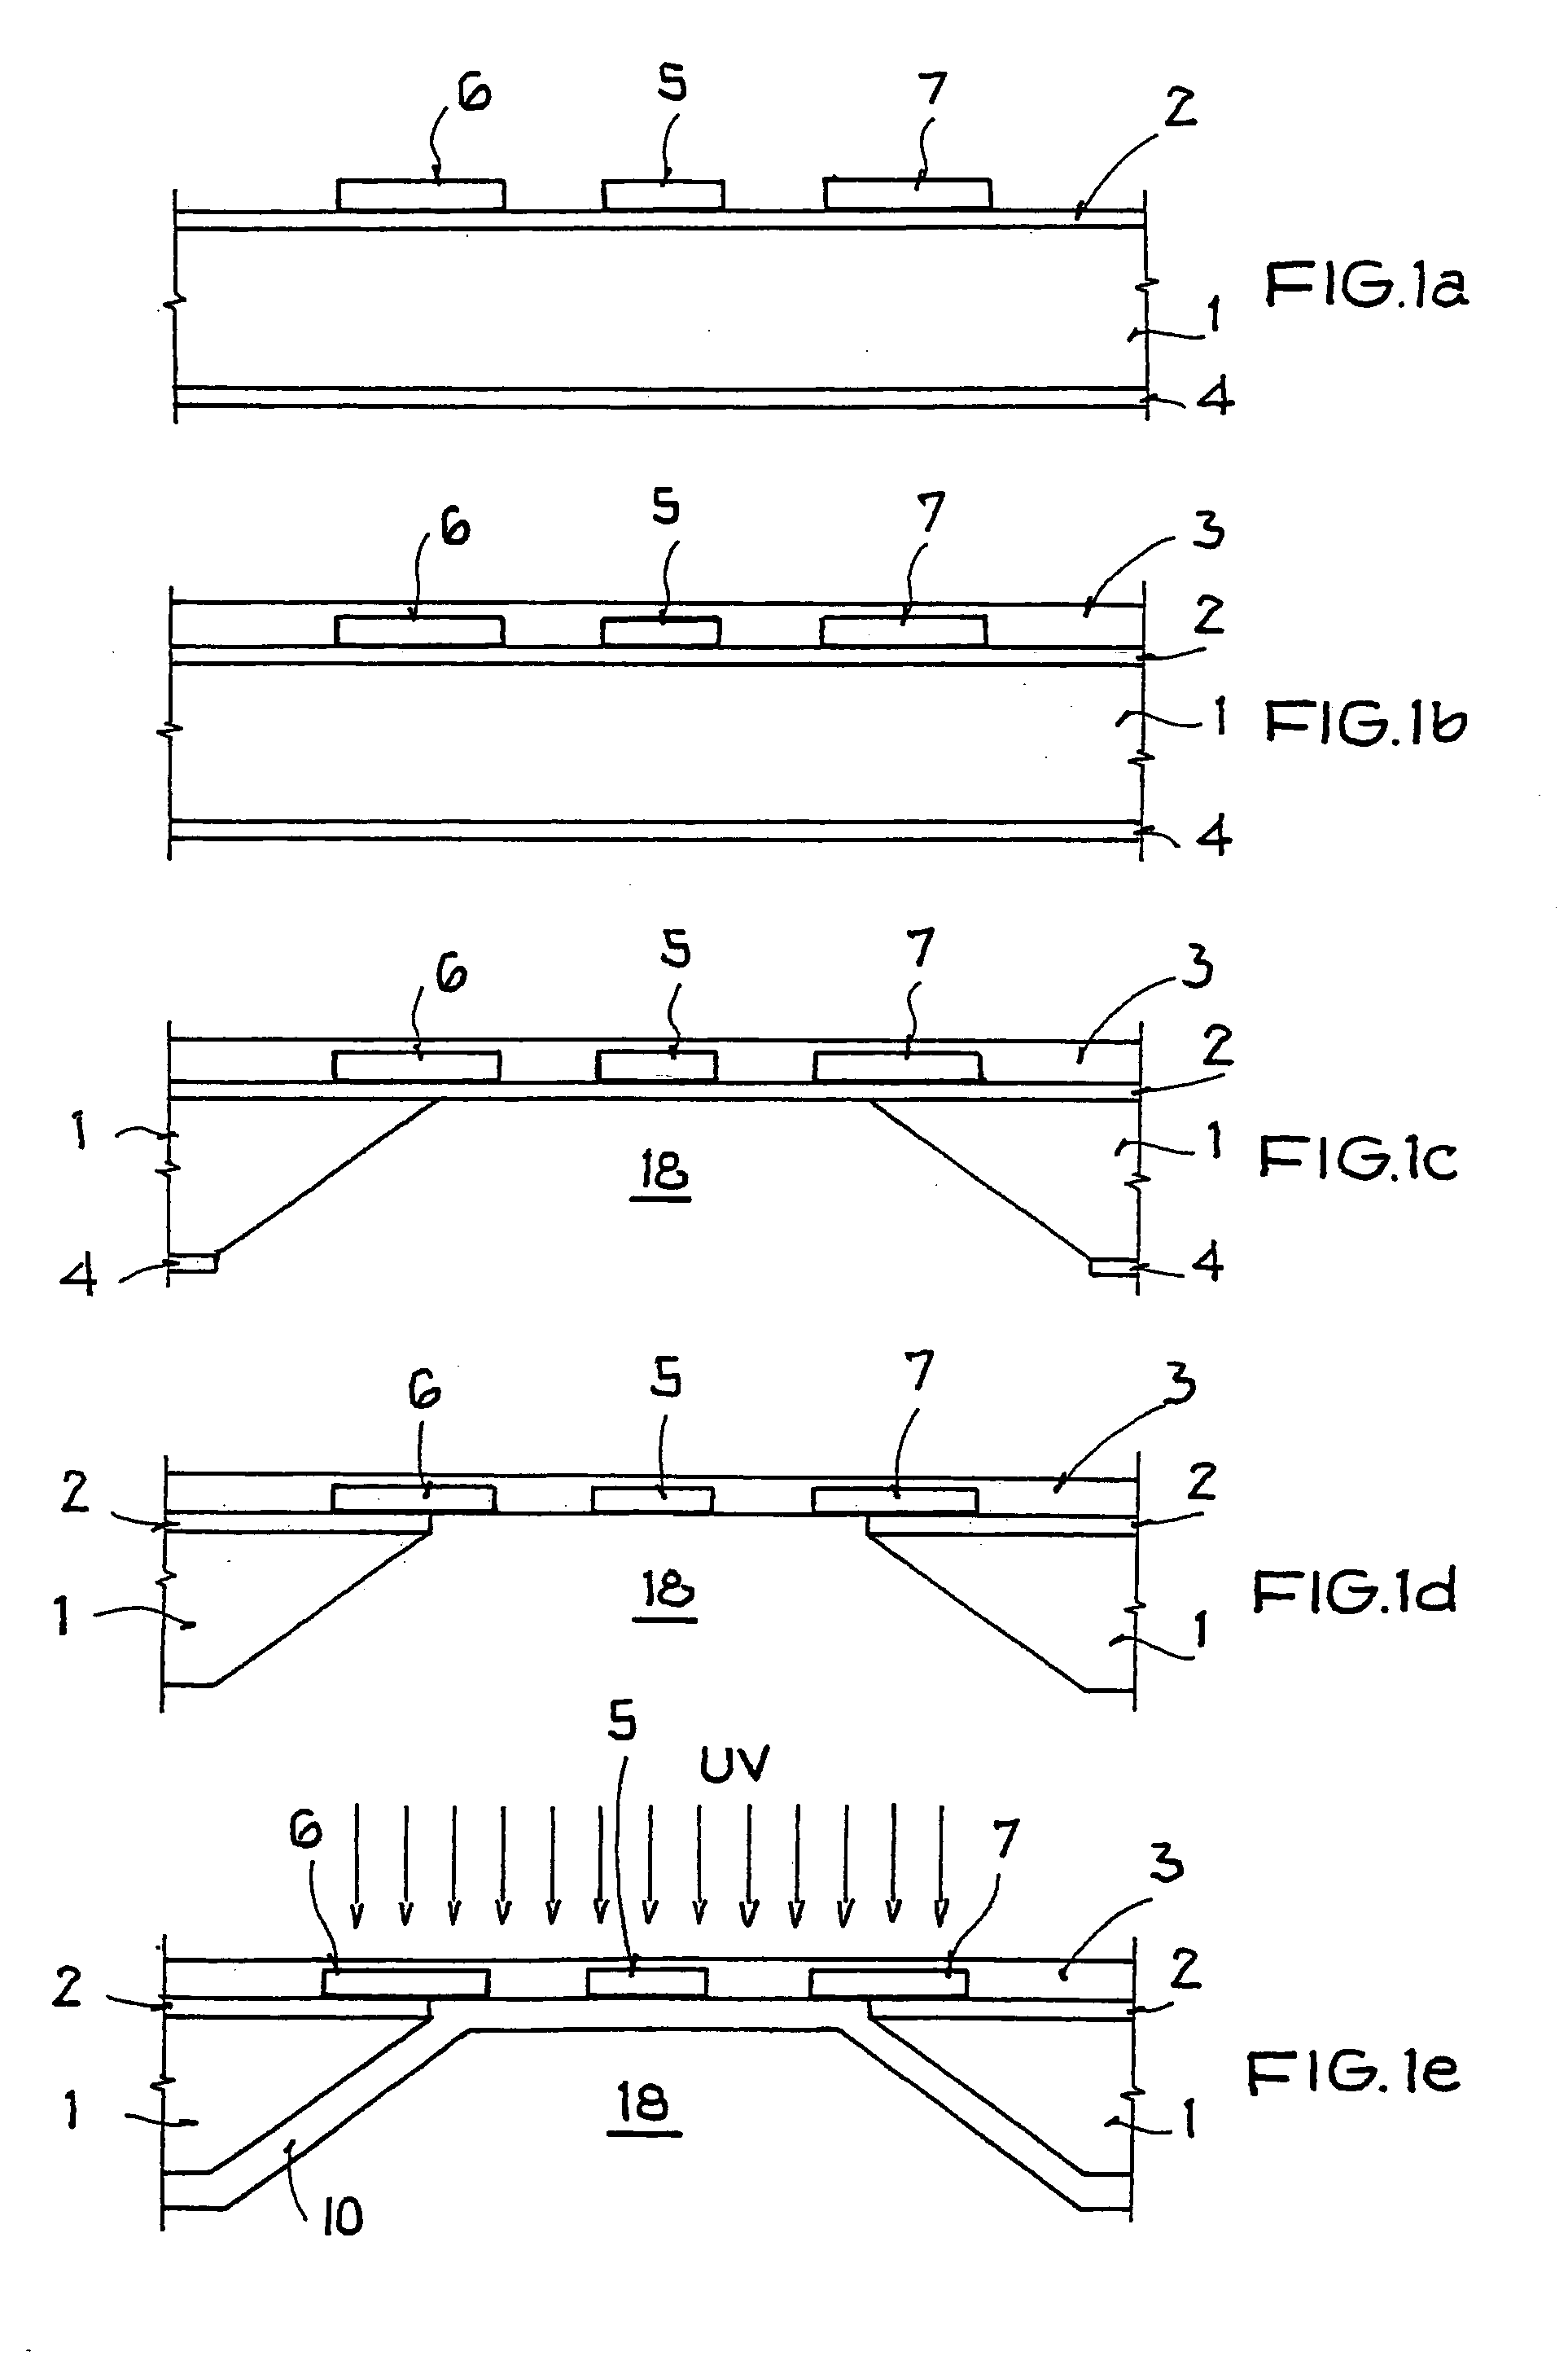 Method for producing a coplanar waveguide system on a substrate, and a component for the transmission of electromagnetic waves fabricated in accordance with such a method